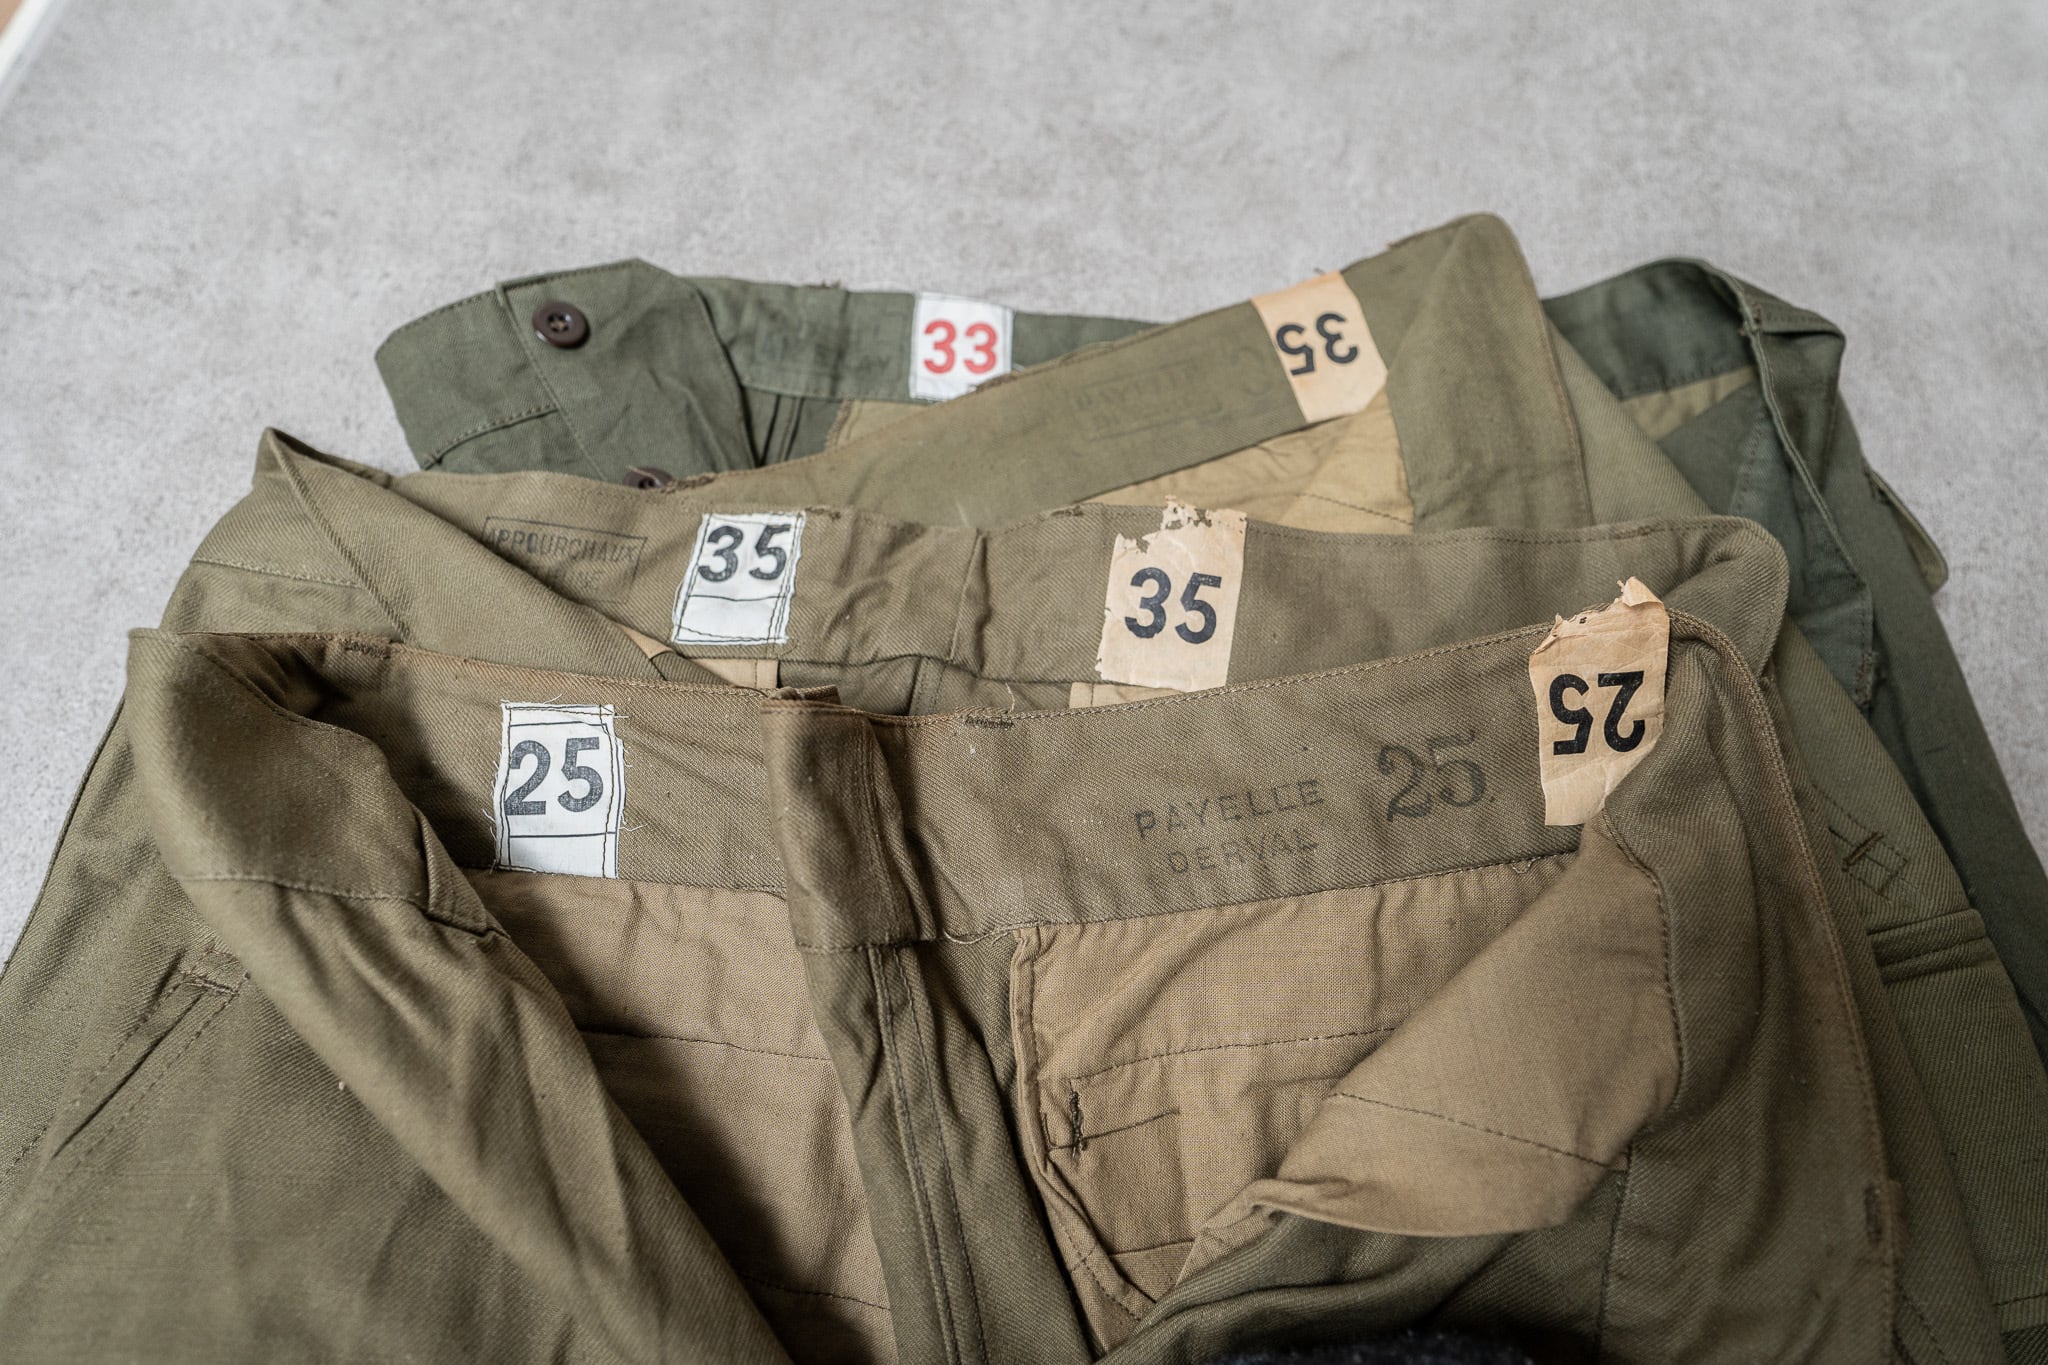 【DEADSTOCK】French Army M-47 Trousers Early Model Size25 実物 フランス軍 M47 カーゴパンツ  前期型 デッドストック 希少 | FAR EAST SIGNAL powered by BASE